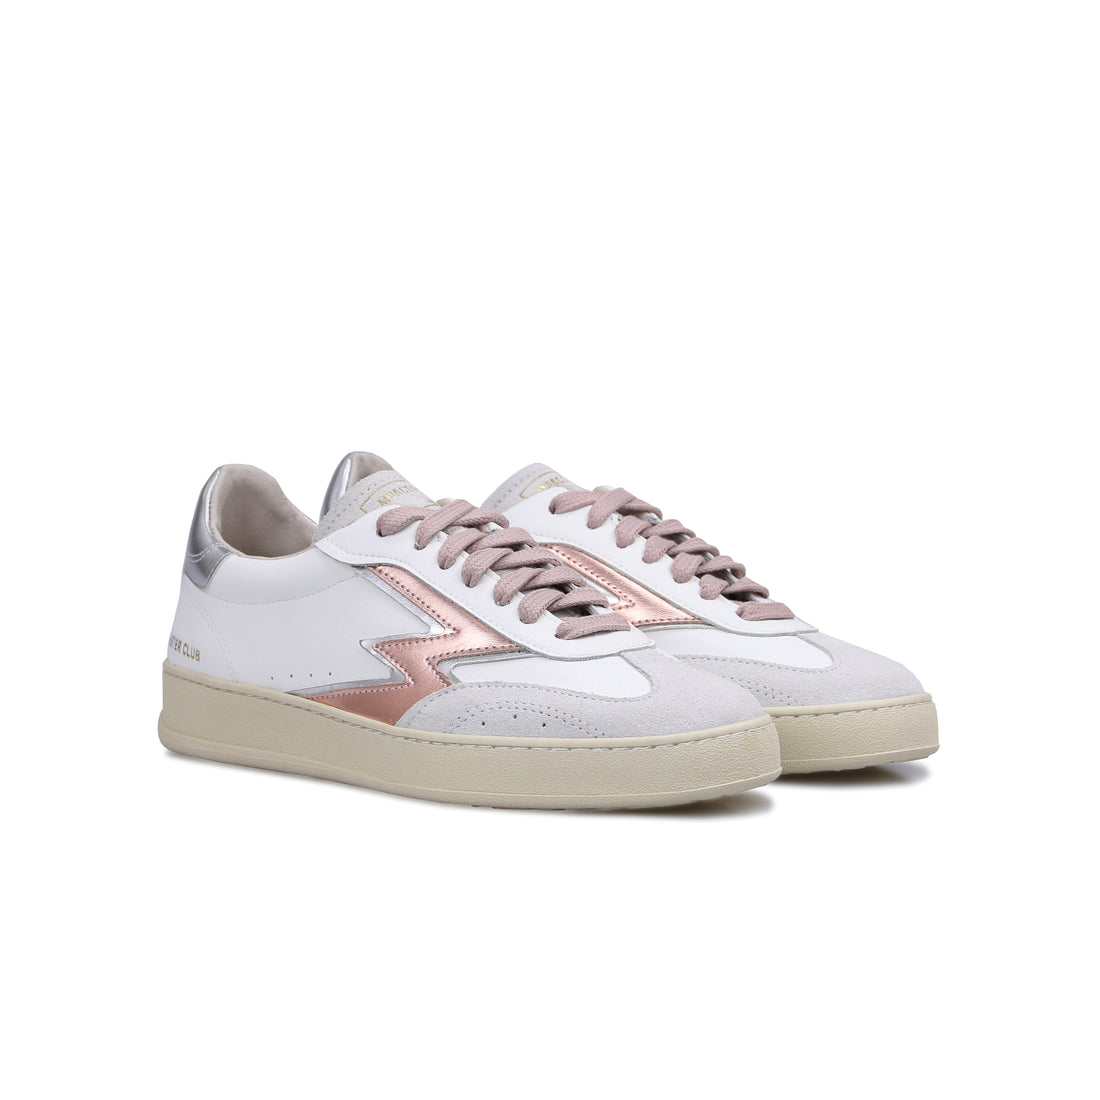 White Club sneakers with rose gold logo